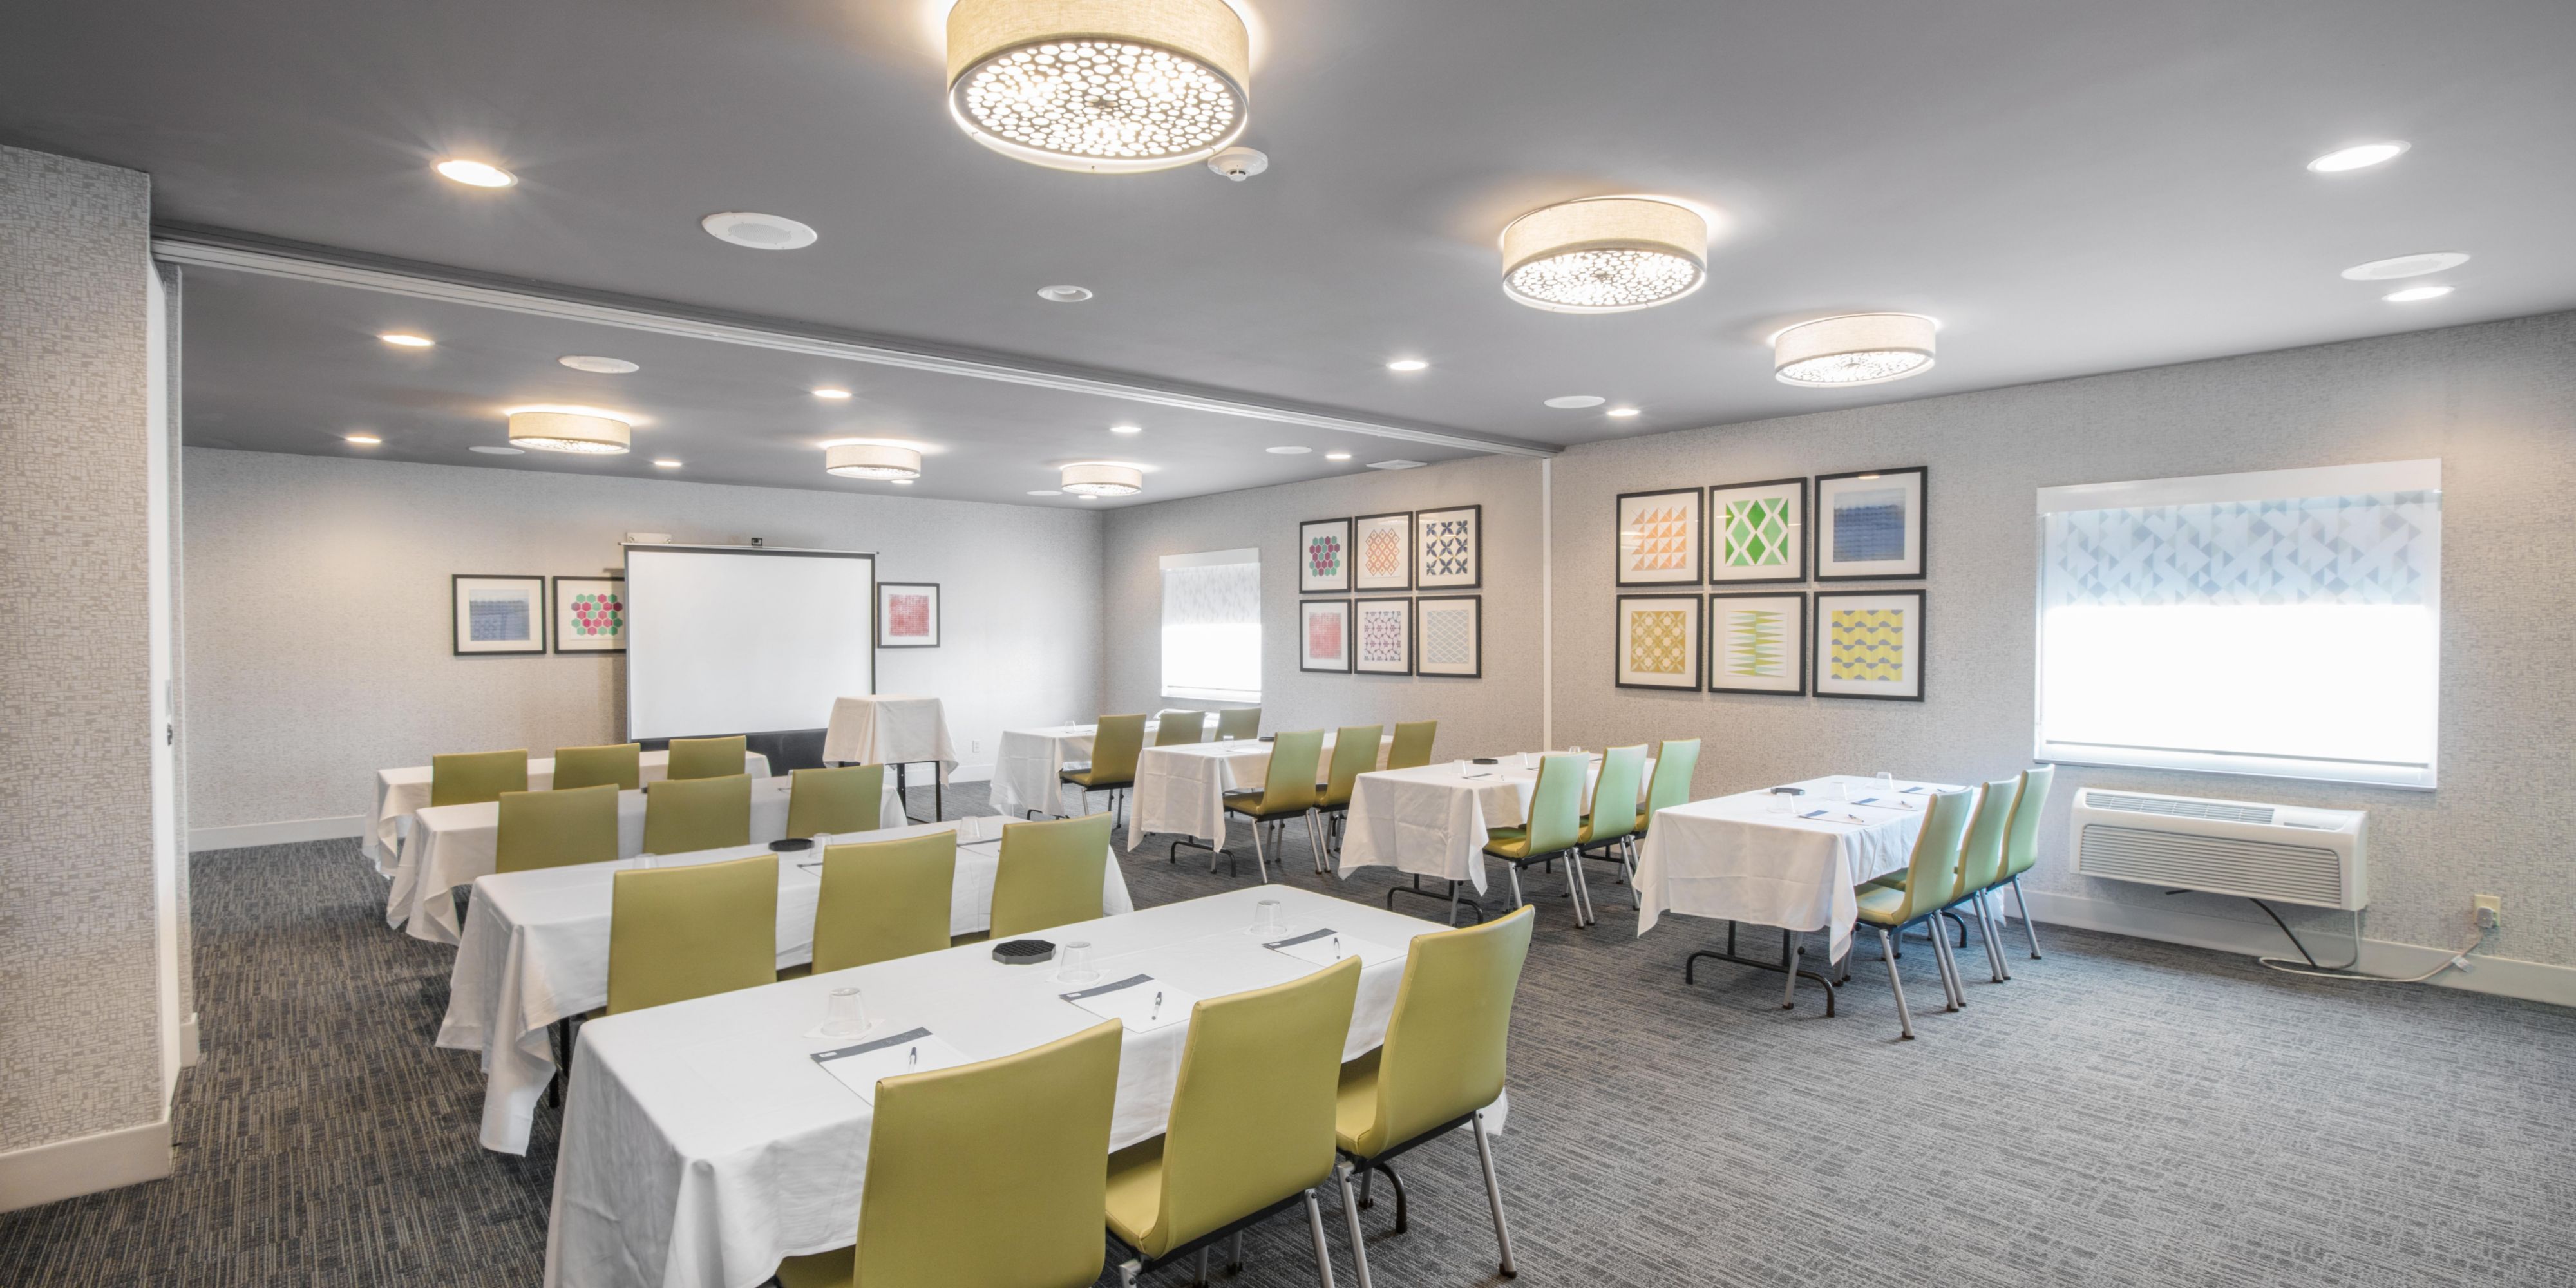 Meeting Room rental is available for up to 50 people depending on the set up. Guests are able to bring in their own food or have it catered. Business Meetings, Graduations, Birthdays, Showers, Reunions! All are welcome!